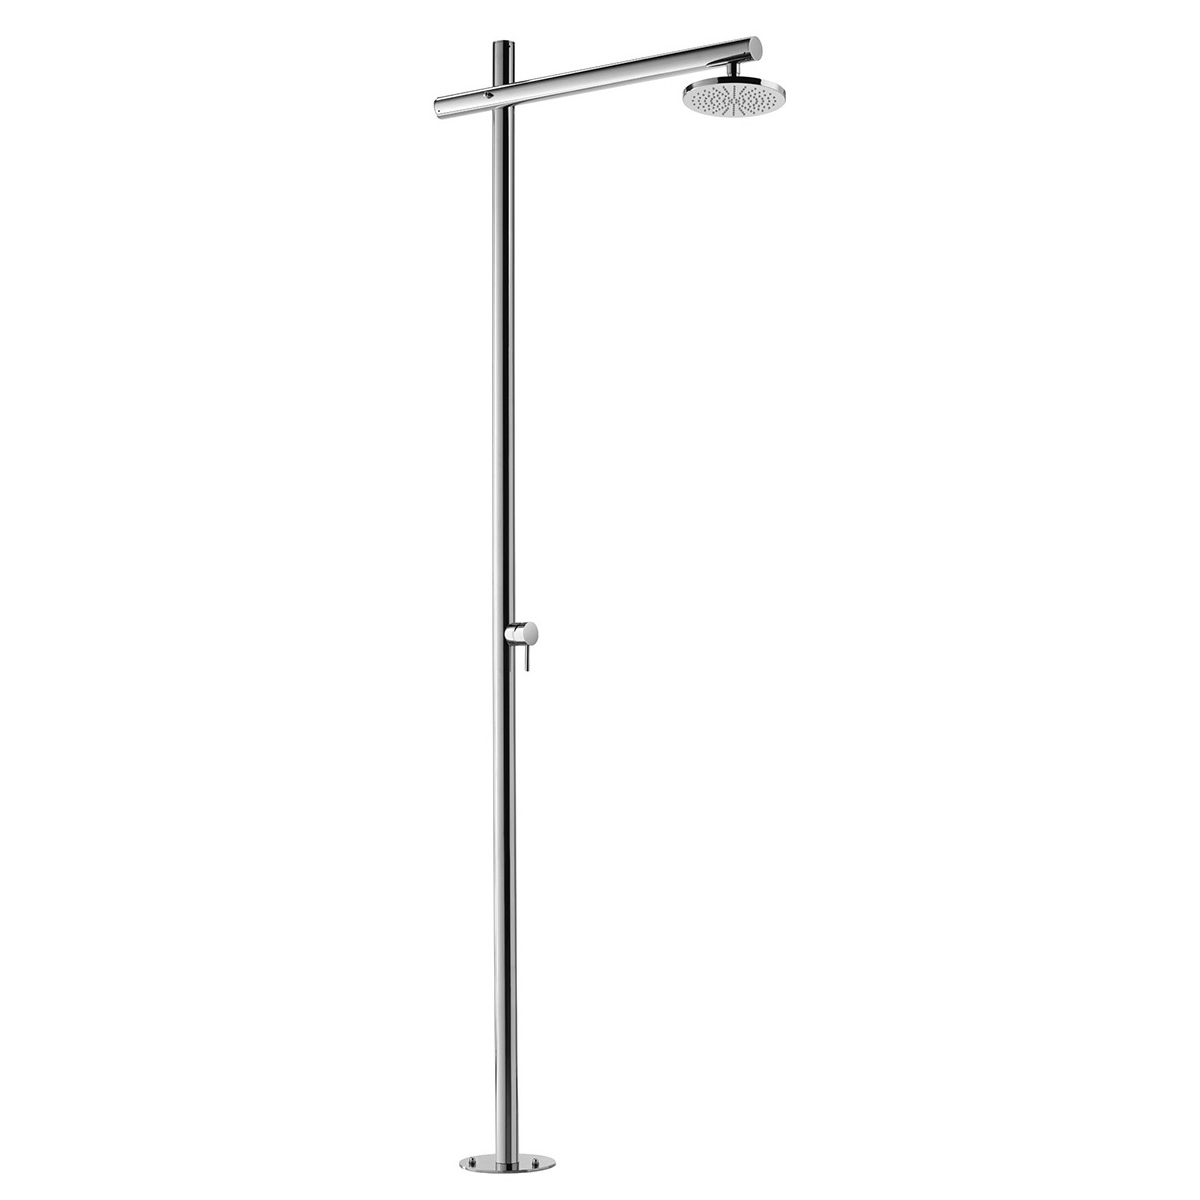 Onda D50 316 Marine Grade Stainless Steel Free Standing Hot and Cold Shower Column